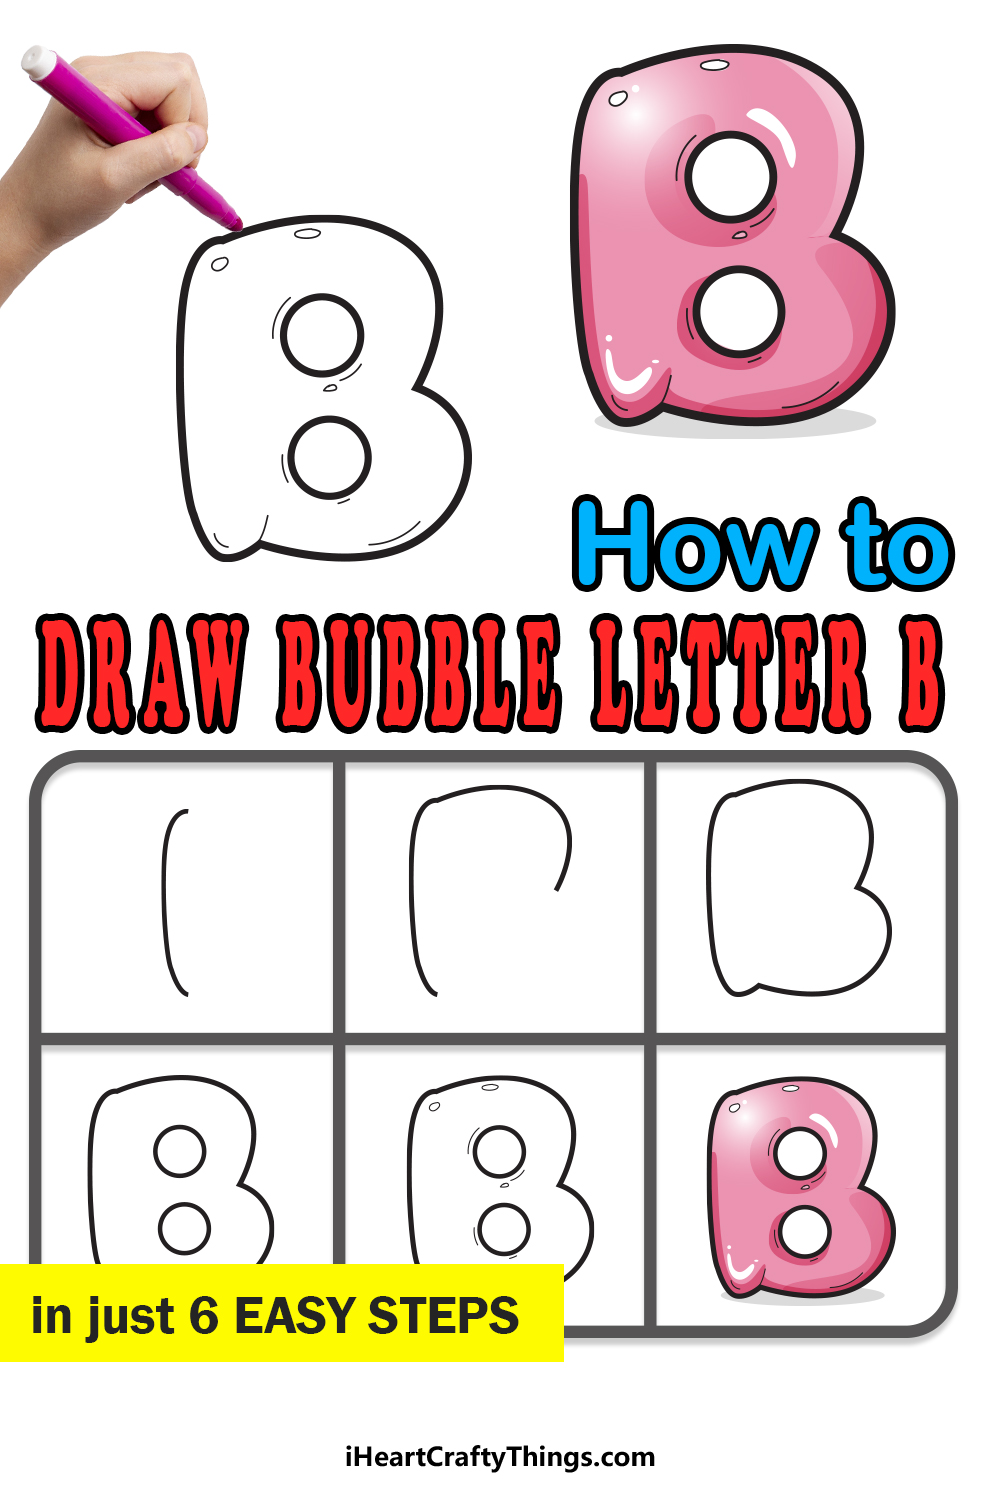 How To Draw Your Own Bubble B step by step guide